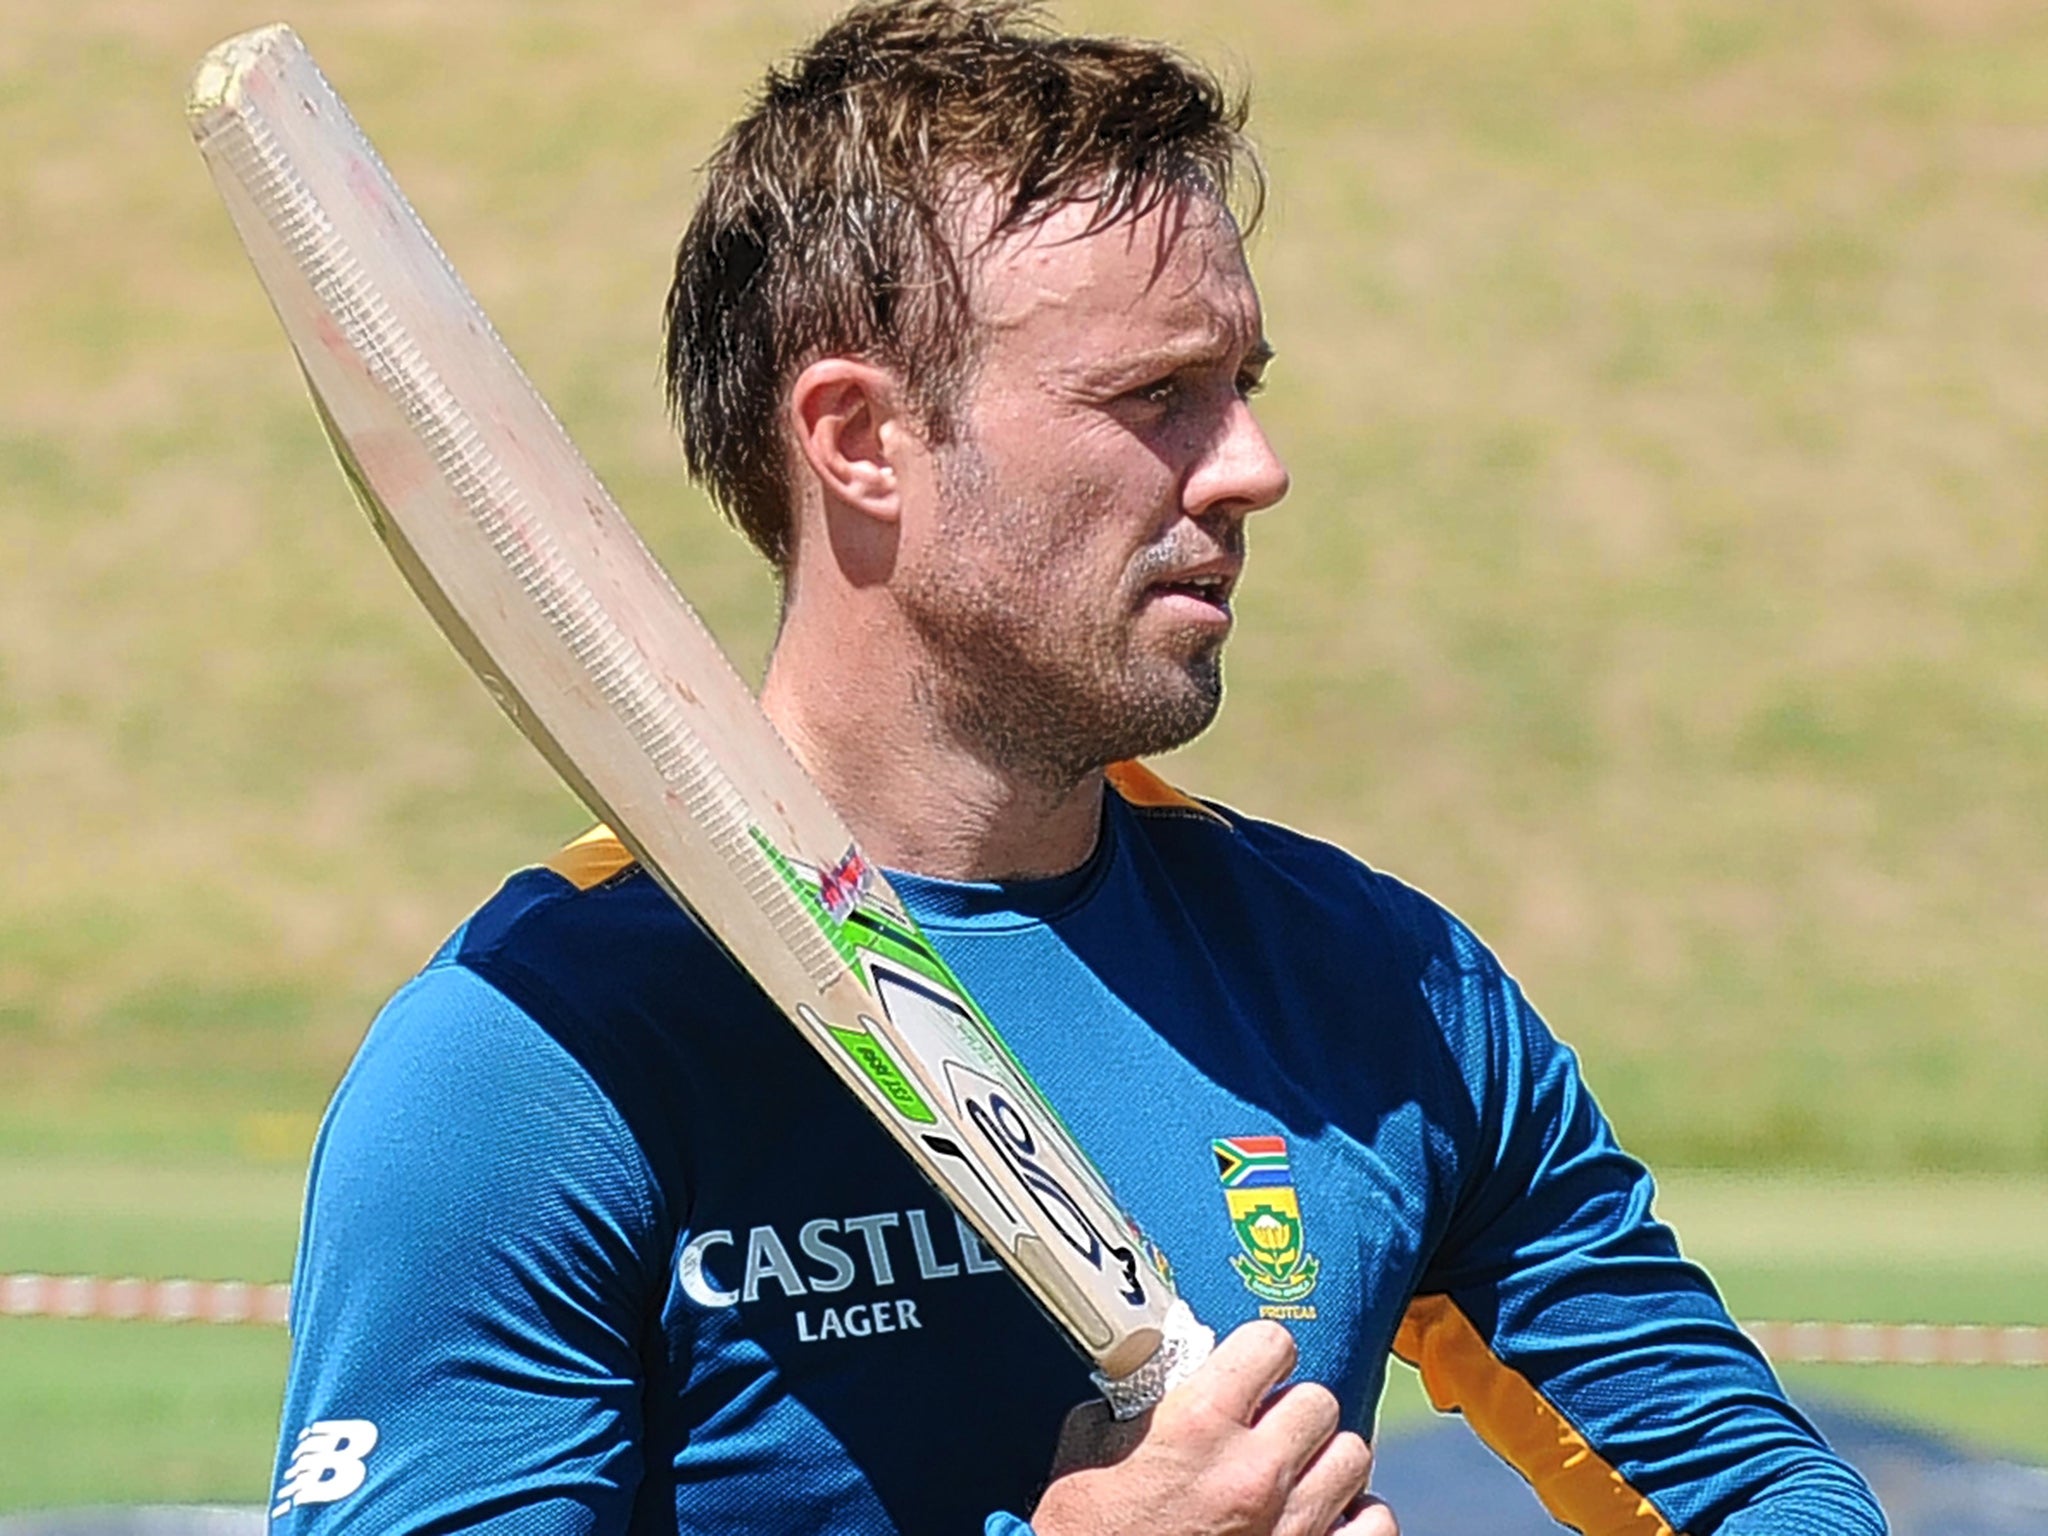 AB de Villiers, training at the Wanderers is leading South Africa for the first time in a Test match